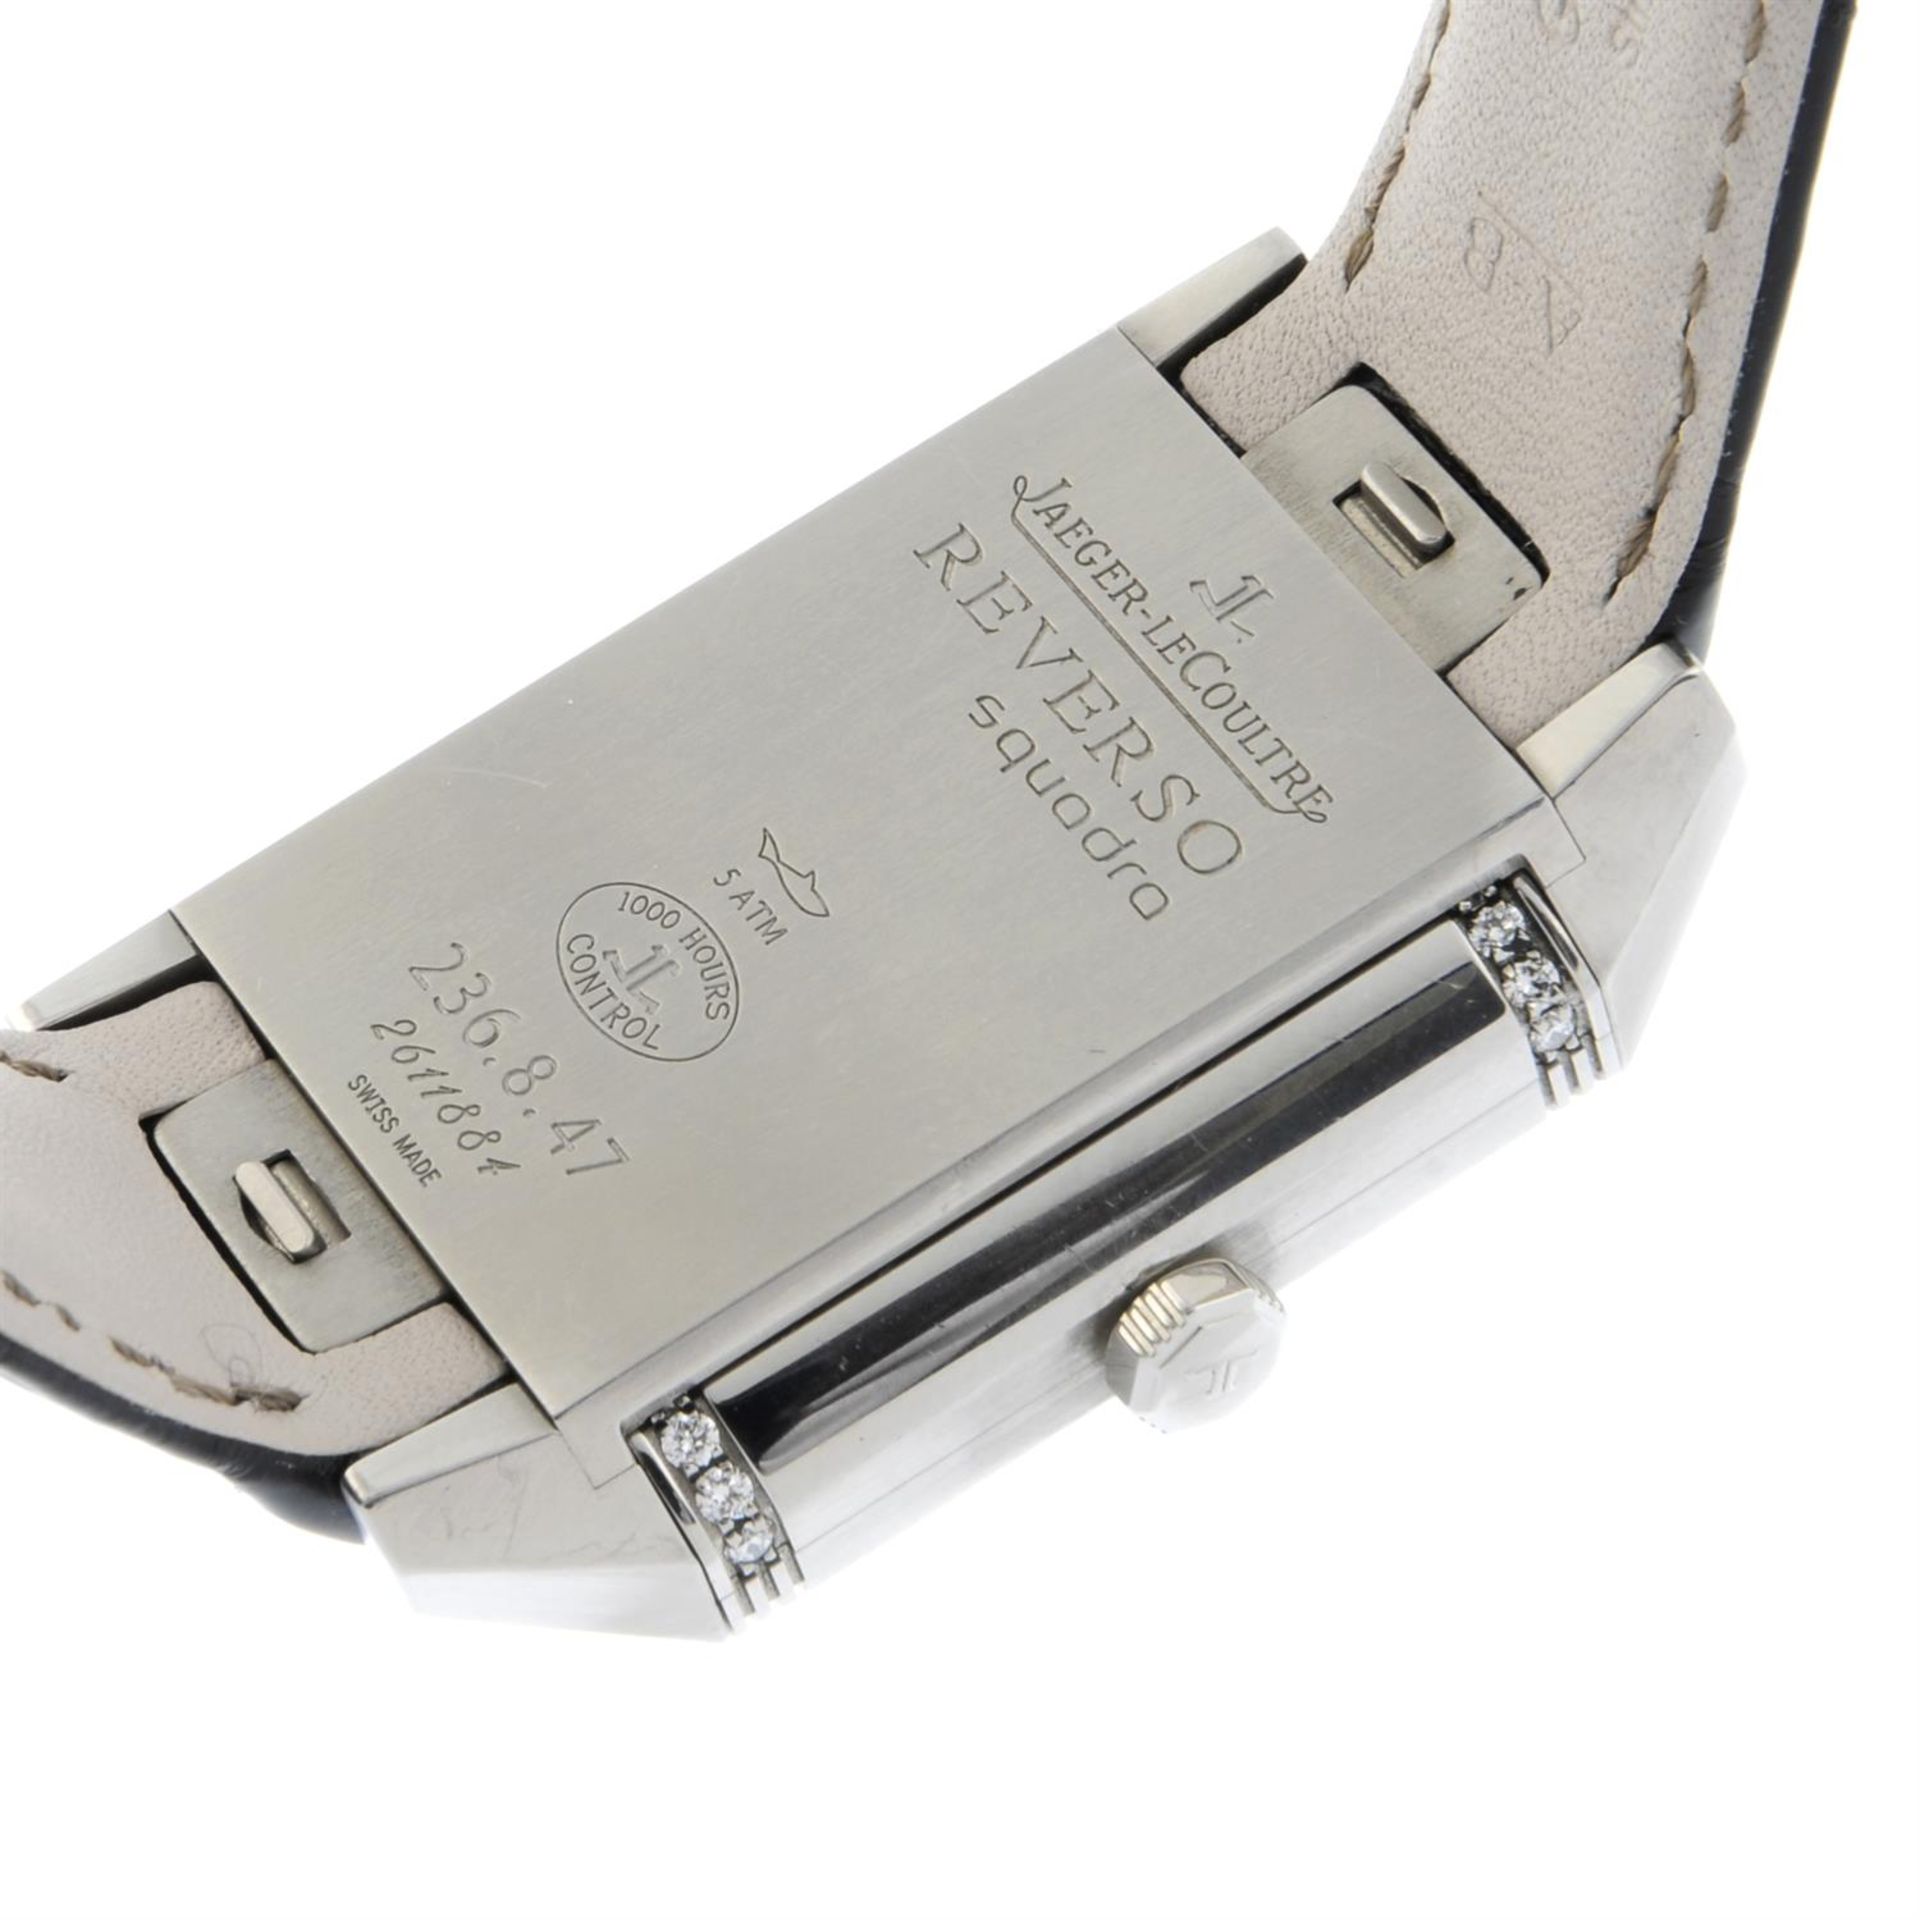 JAEGER-LECOULTRE - a factory diamond set stainless steel Reverso Squadra wrist watch, 31x35mm. - Image 5 of 6